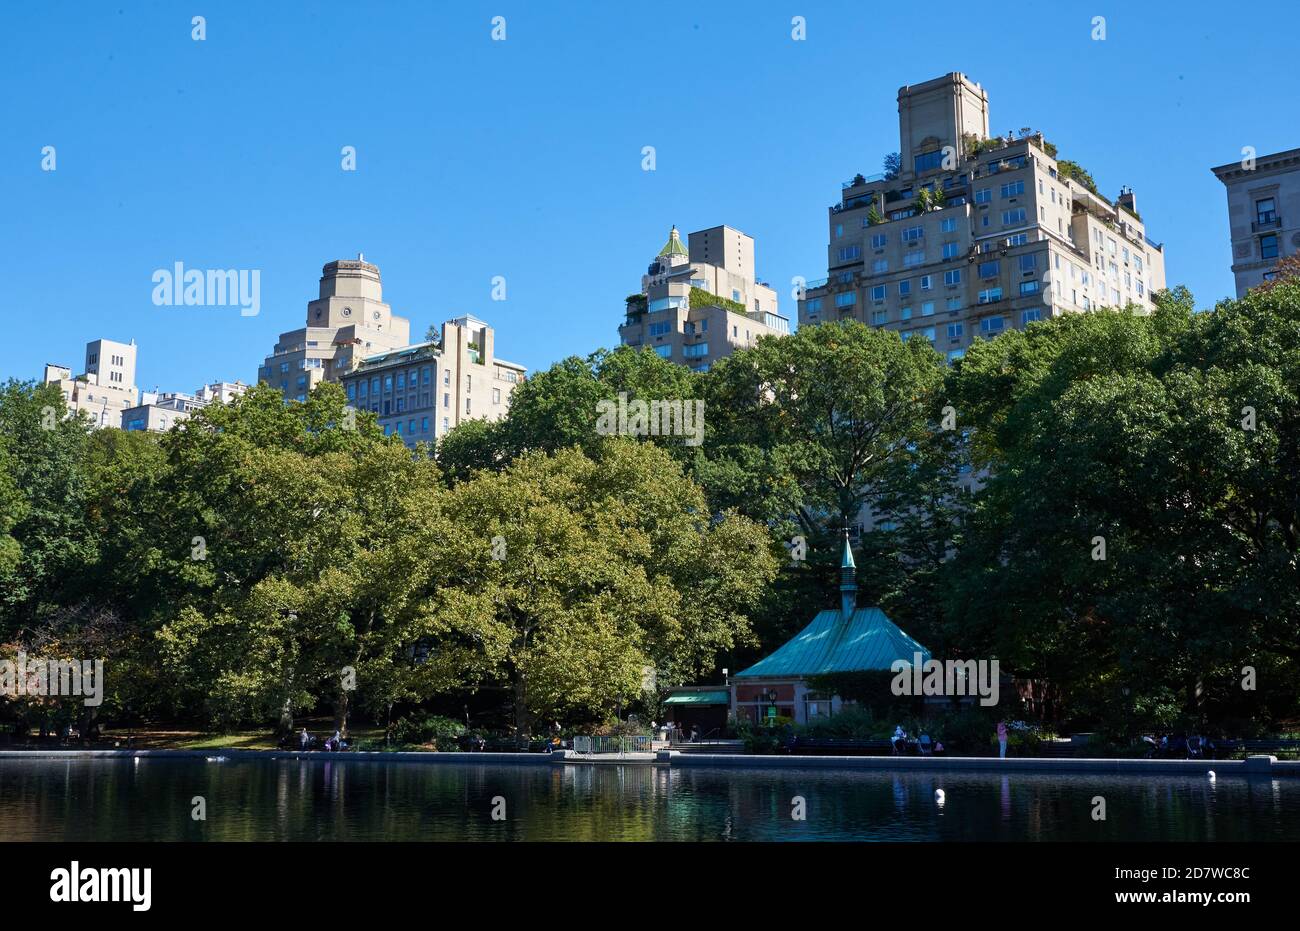 Conservatory Water is model boat pond in Central Park in Manhattan, New York City. Beyond the trees are apartment buildings on Fifth Avenue Stock Photo